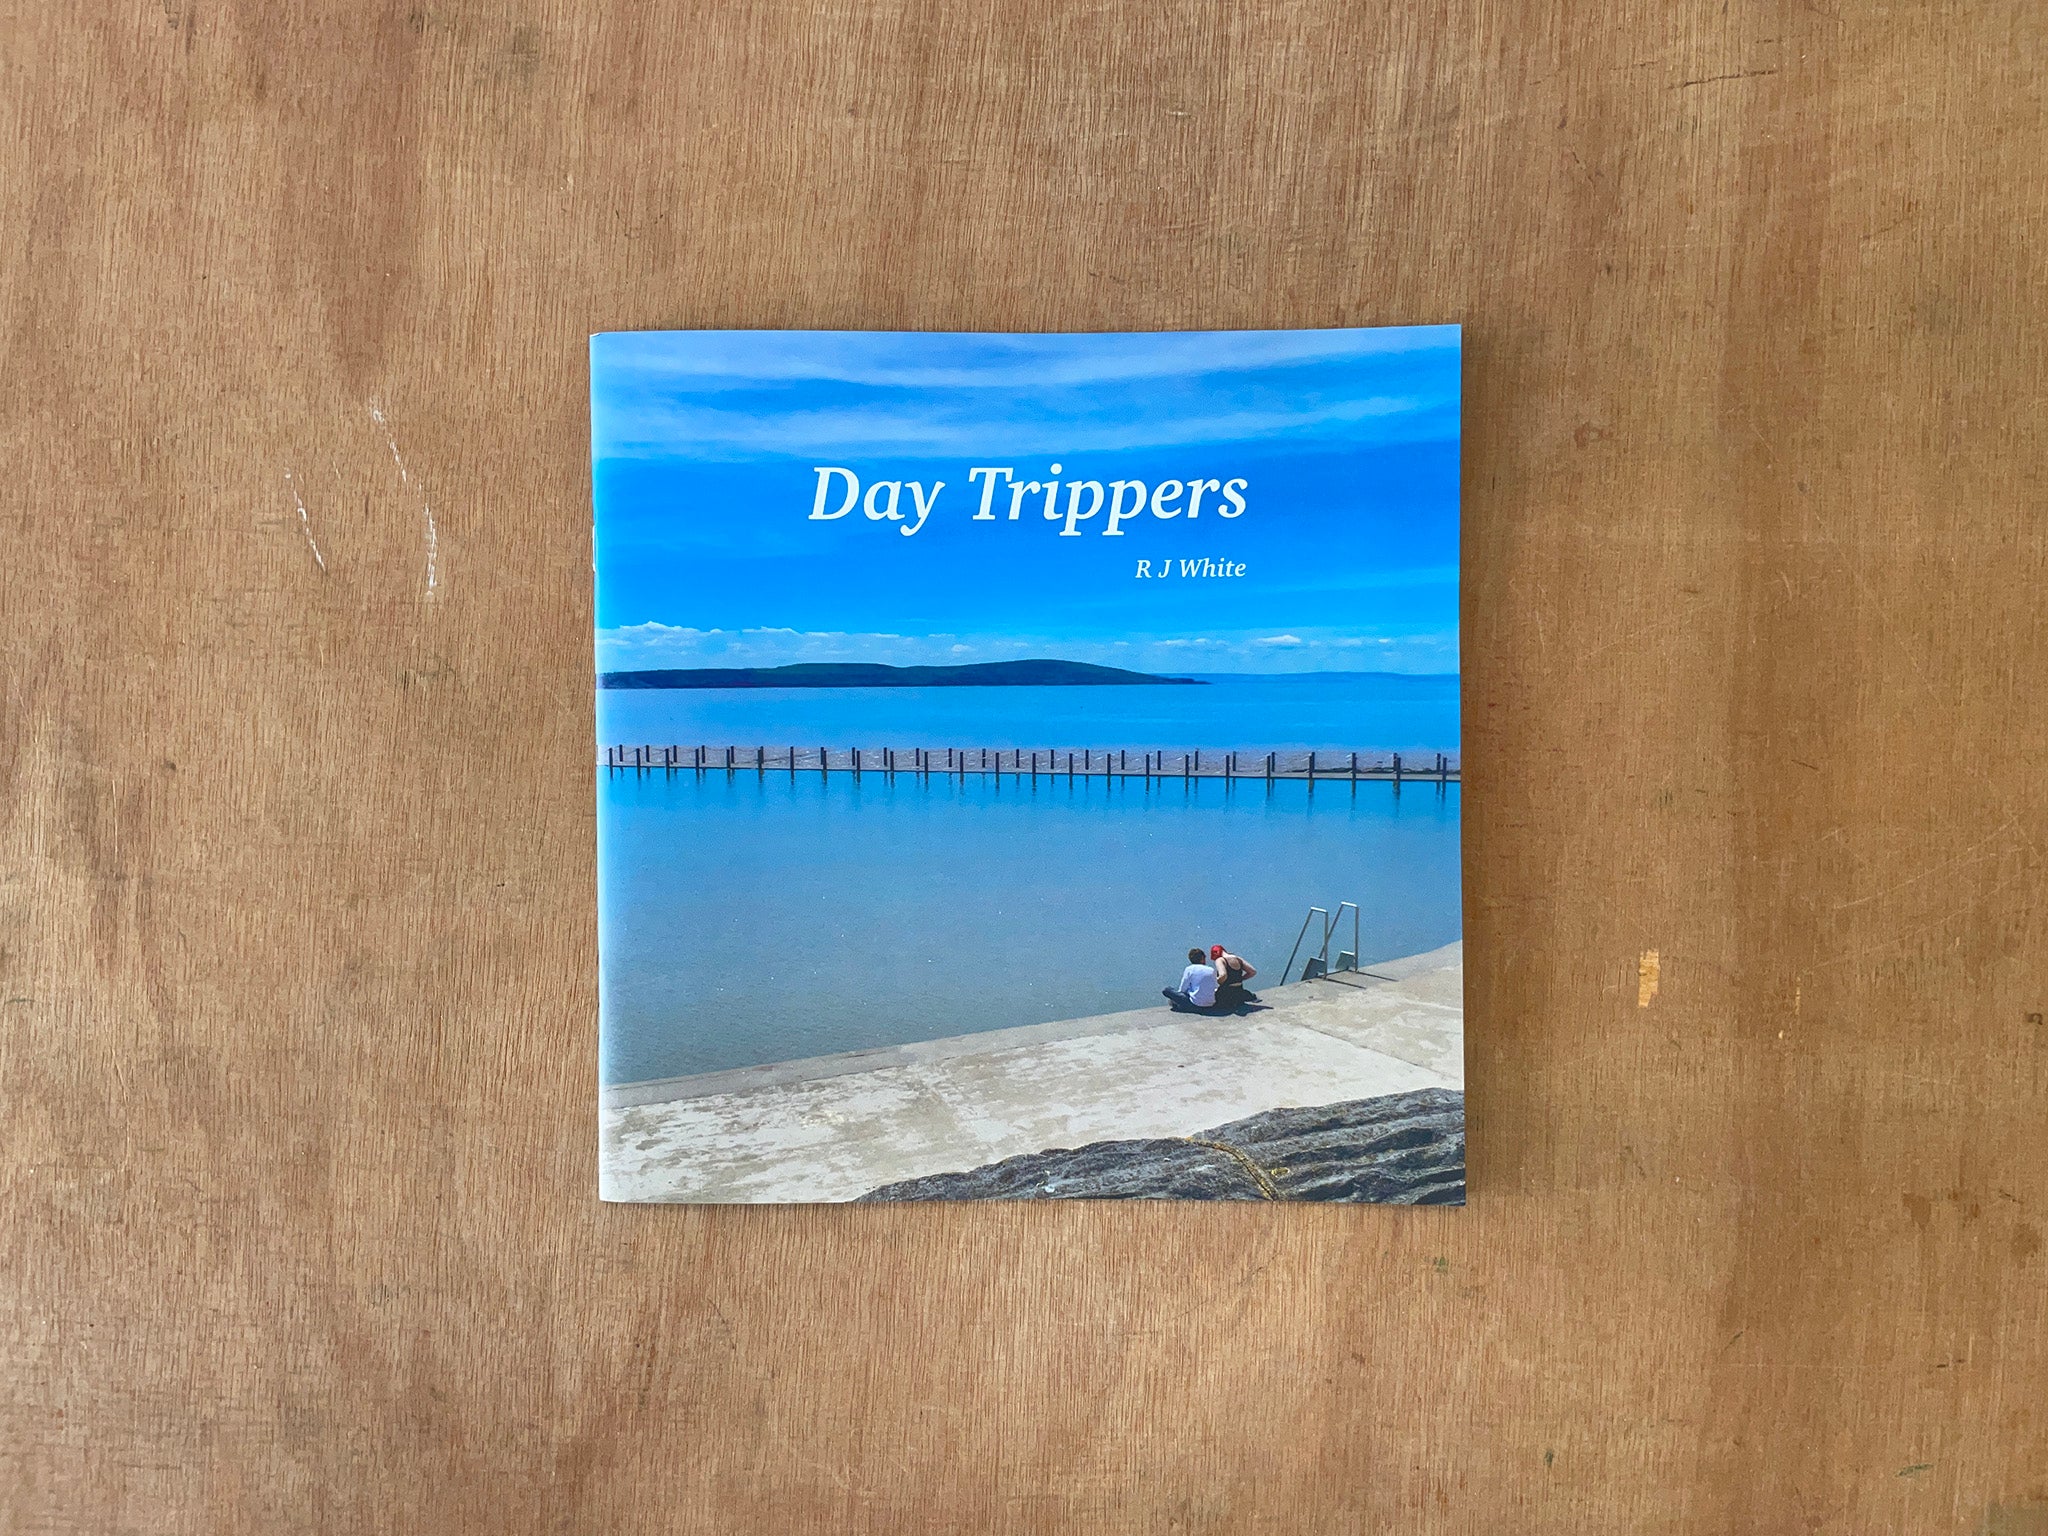 DAY TRIPPERS by RJ White